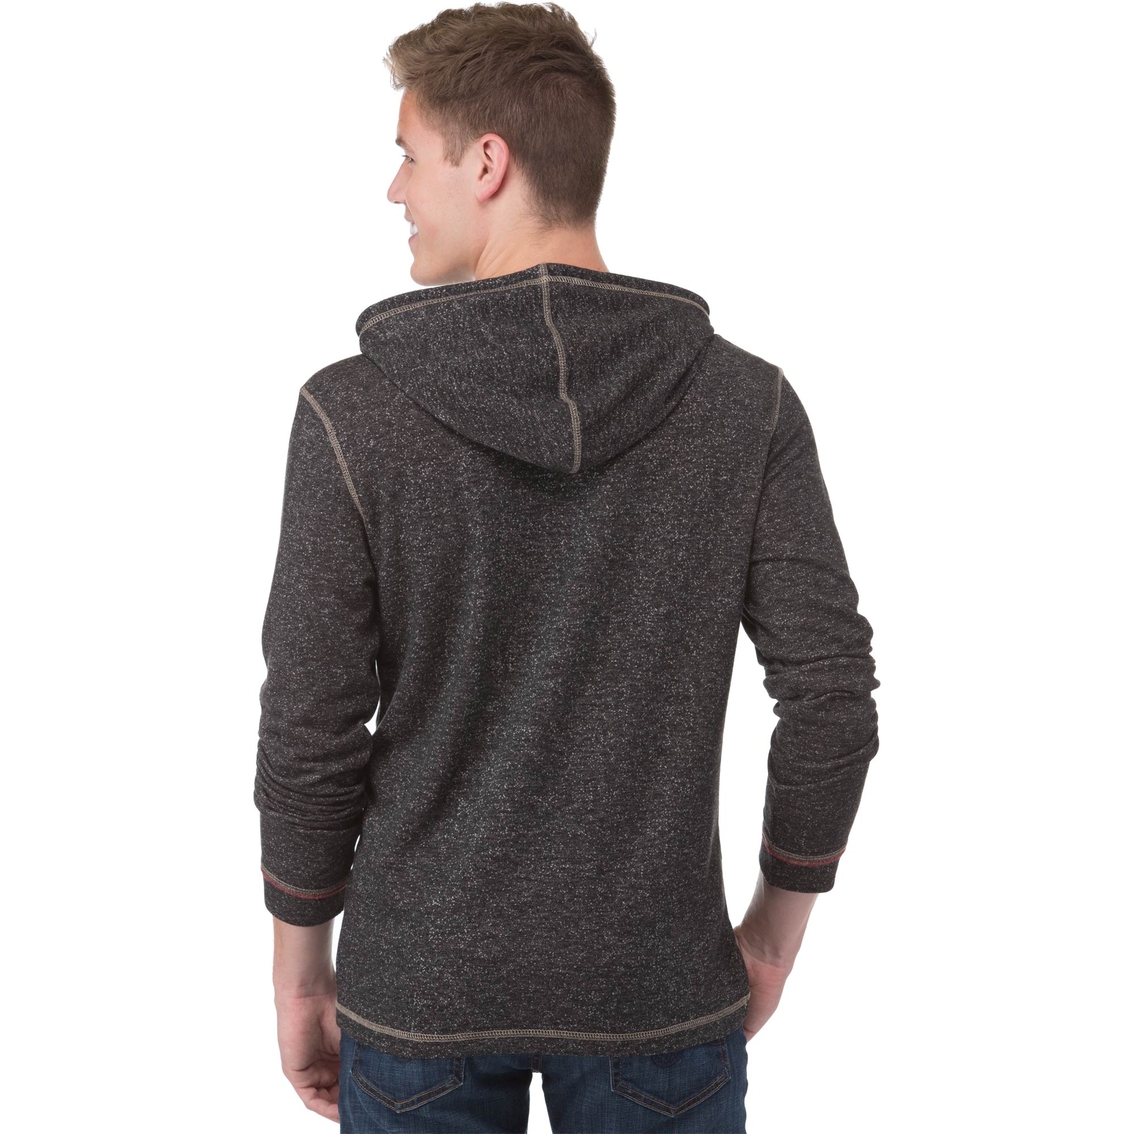 Unzipped Hoodie with Check Pocket - Image 2 of 2